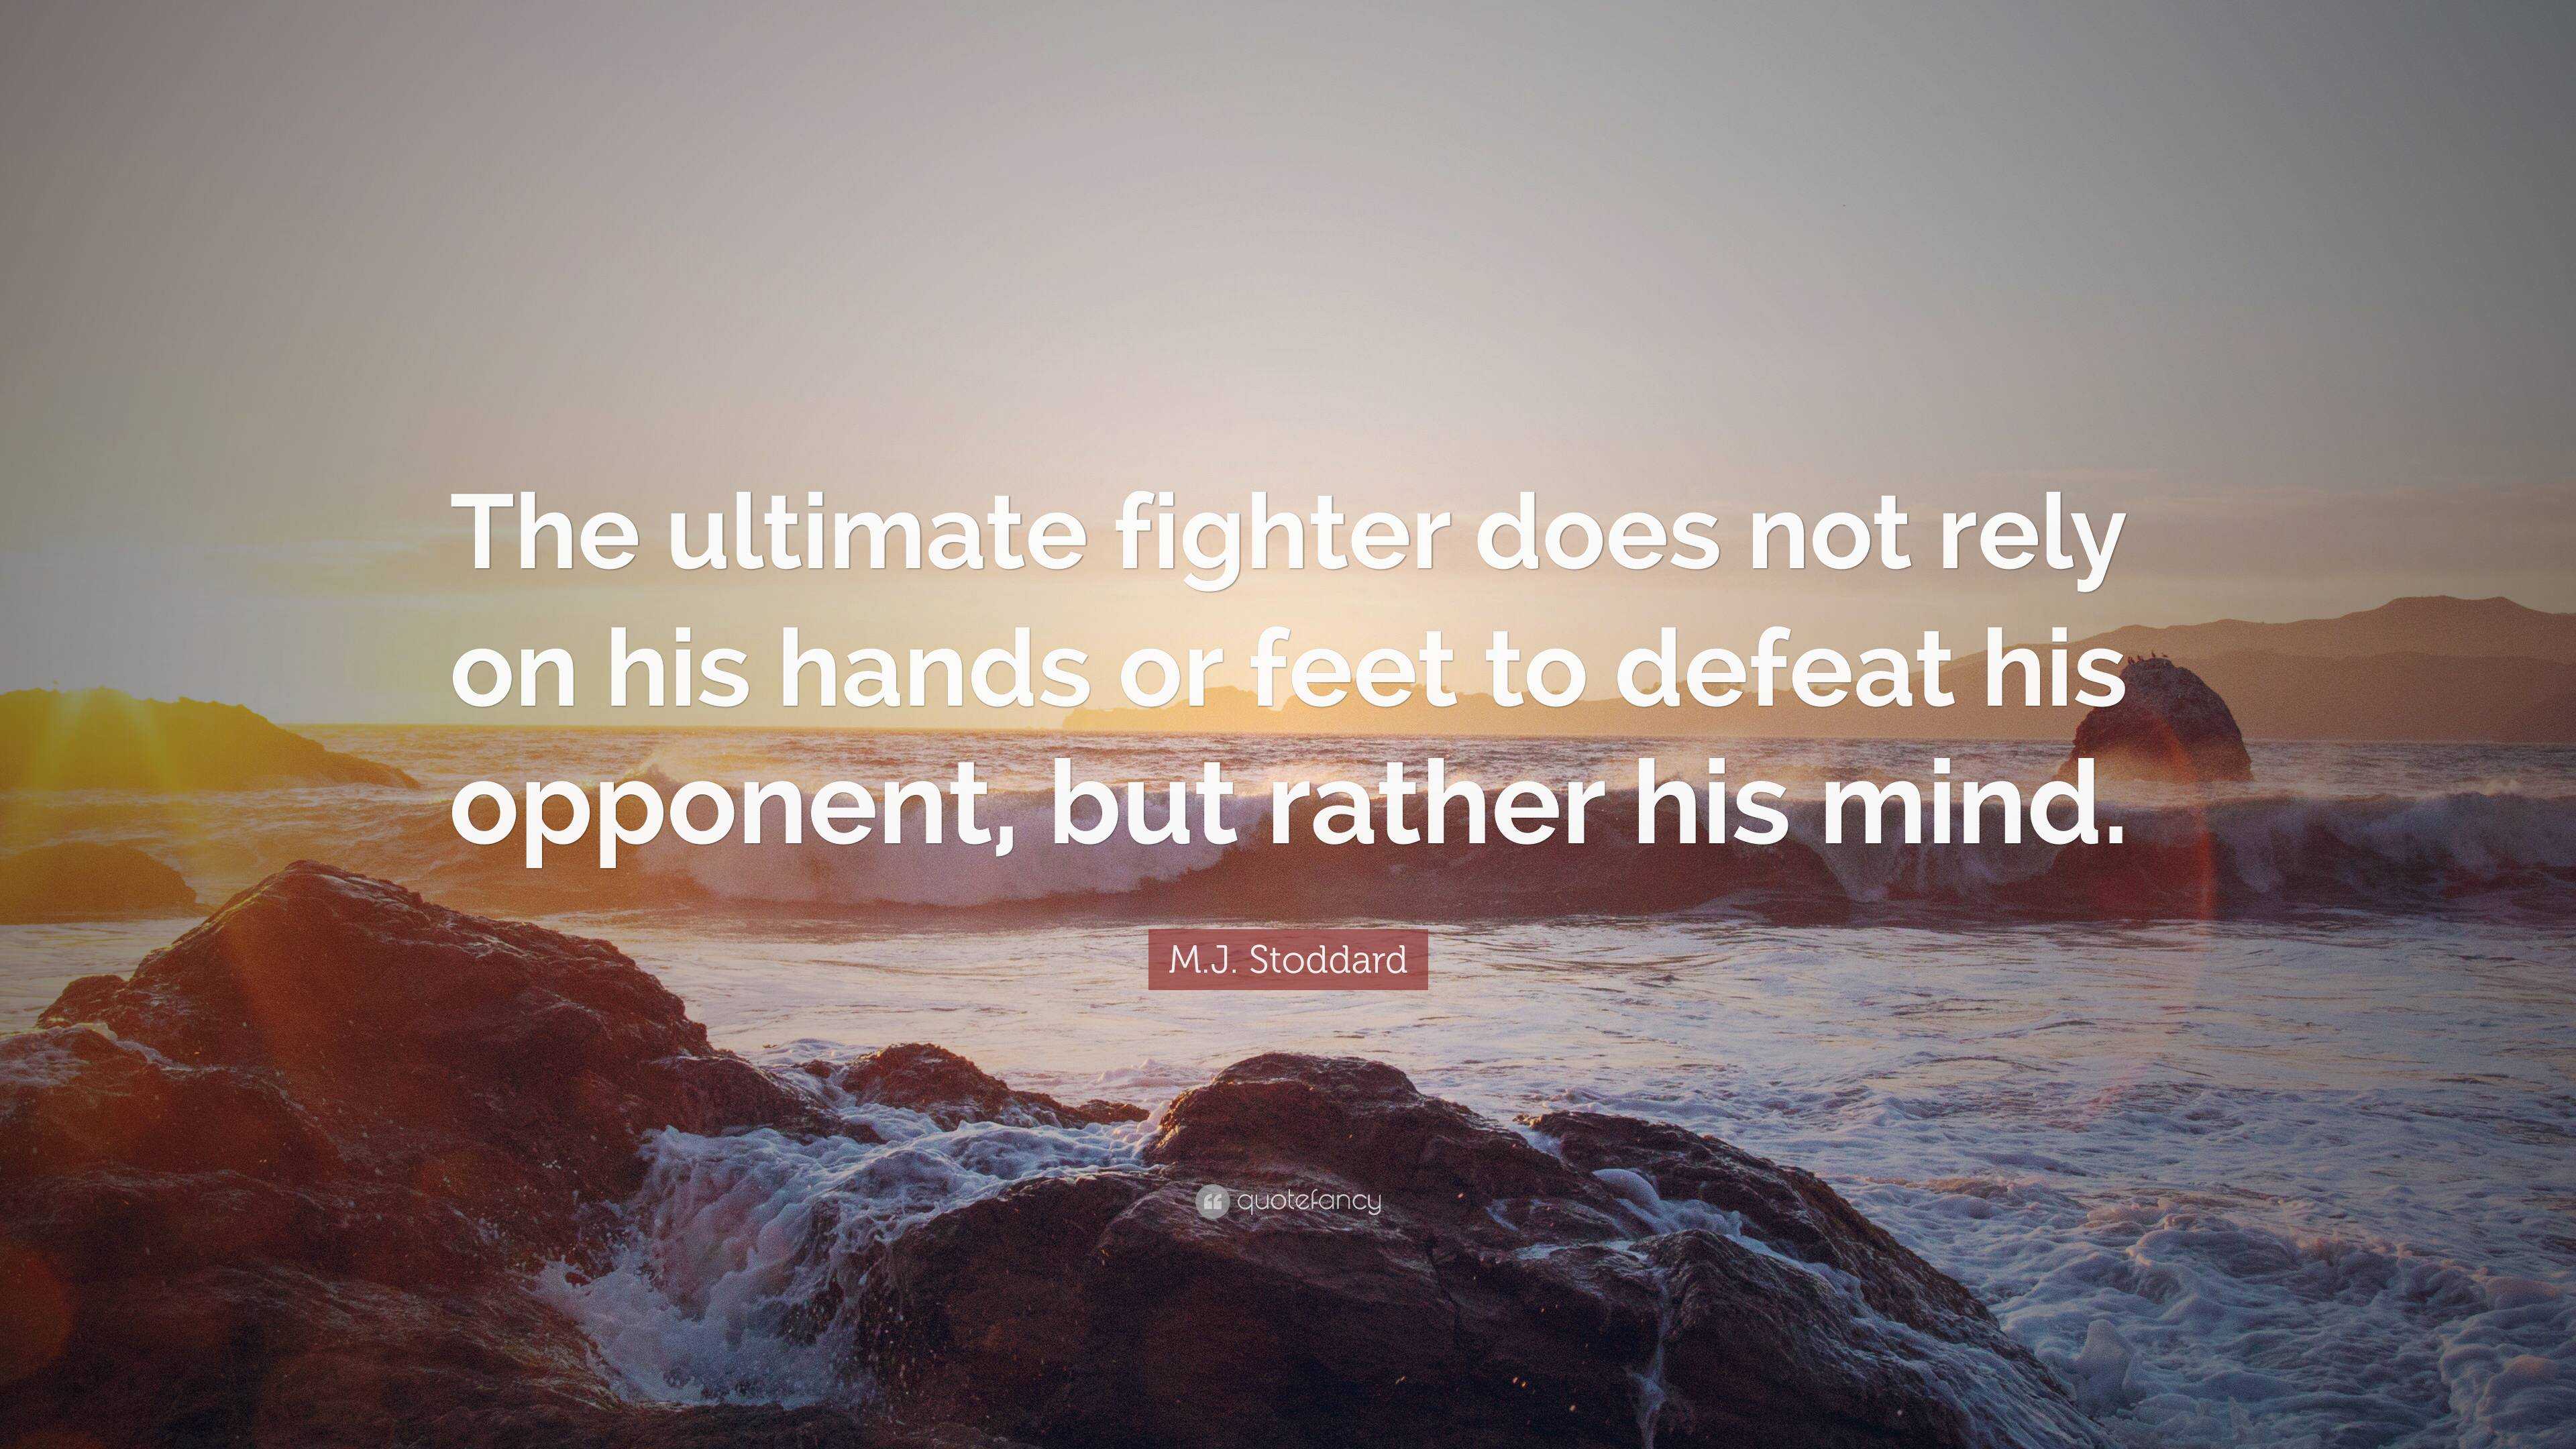 M.J. Stoddard Quote: “The ultimate fighter does not rely on his